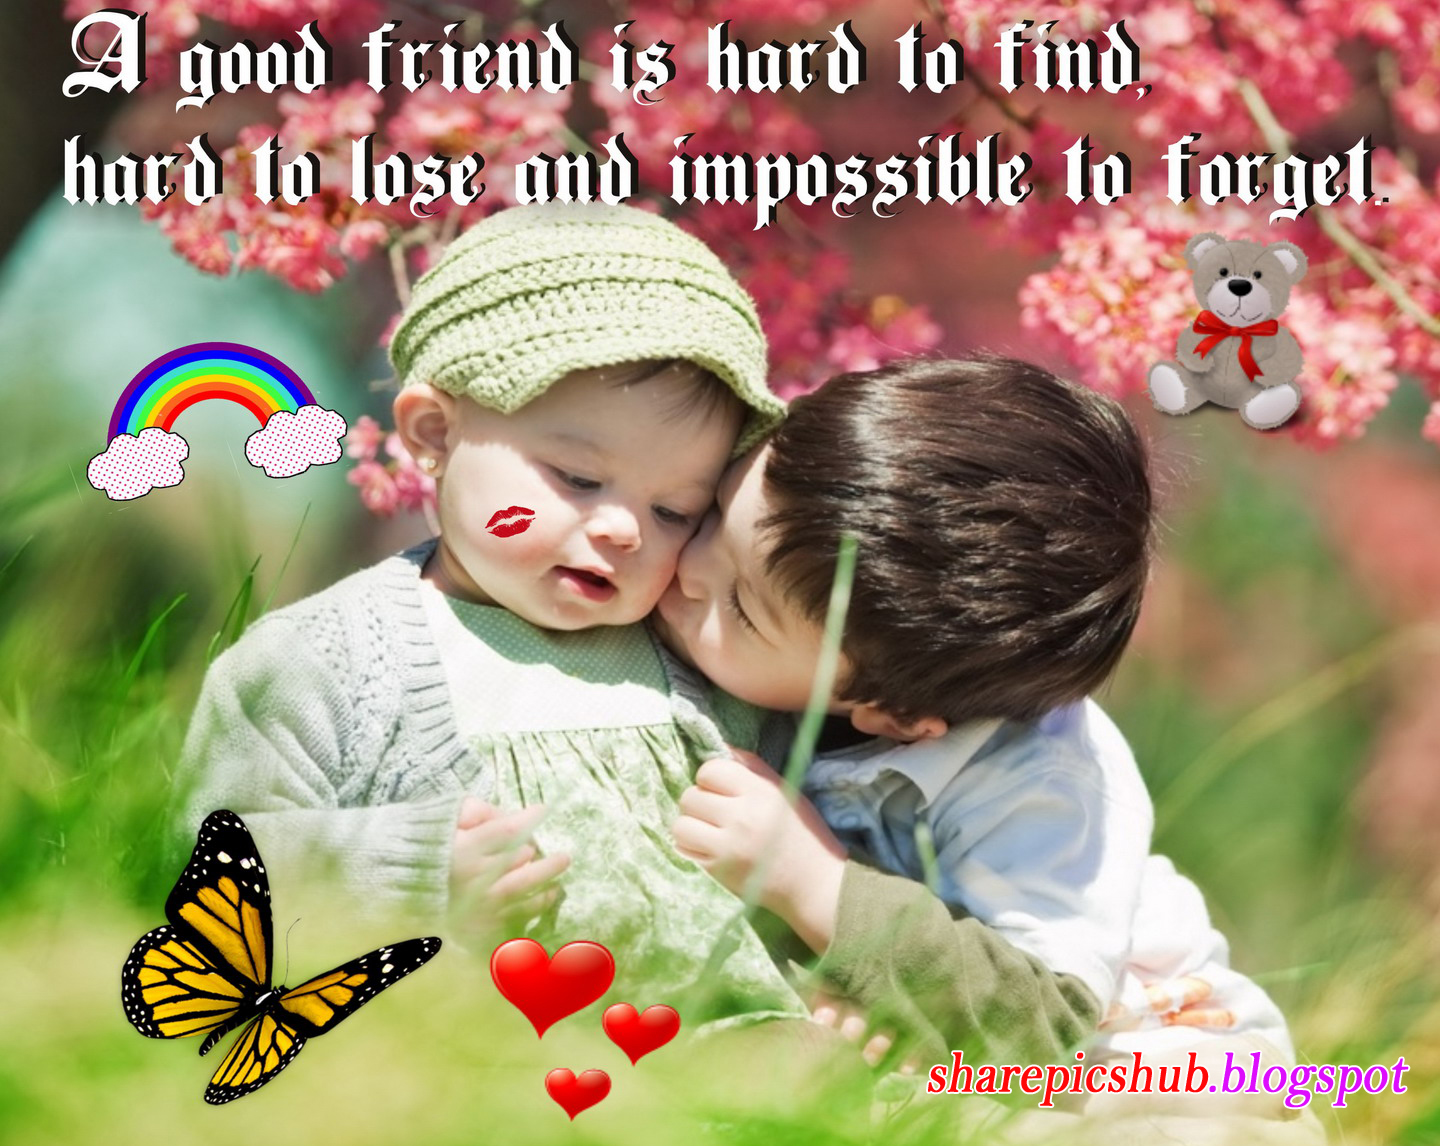 cute friendship quotes with images for facebook